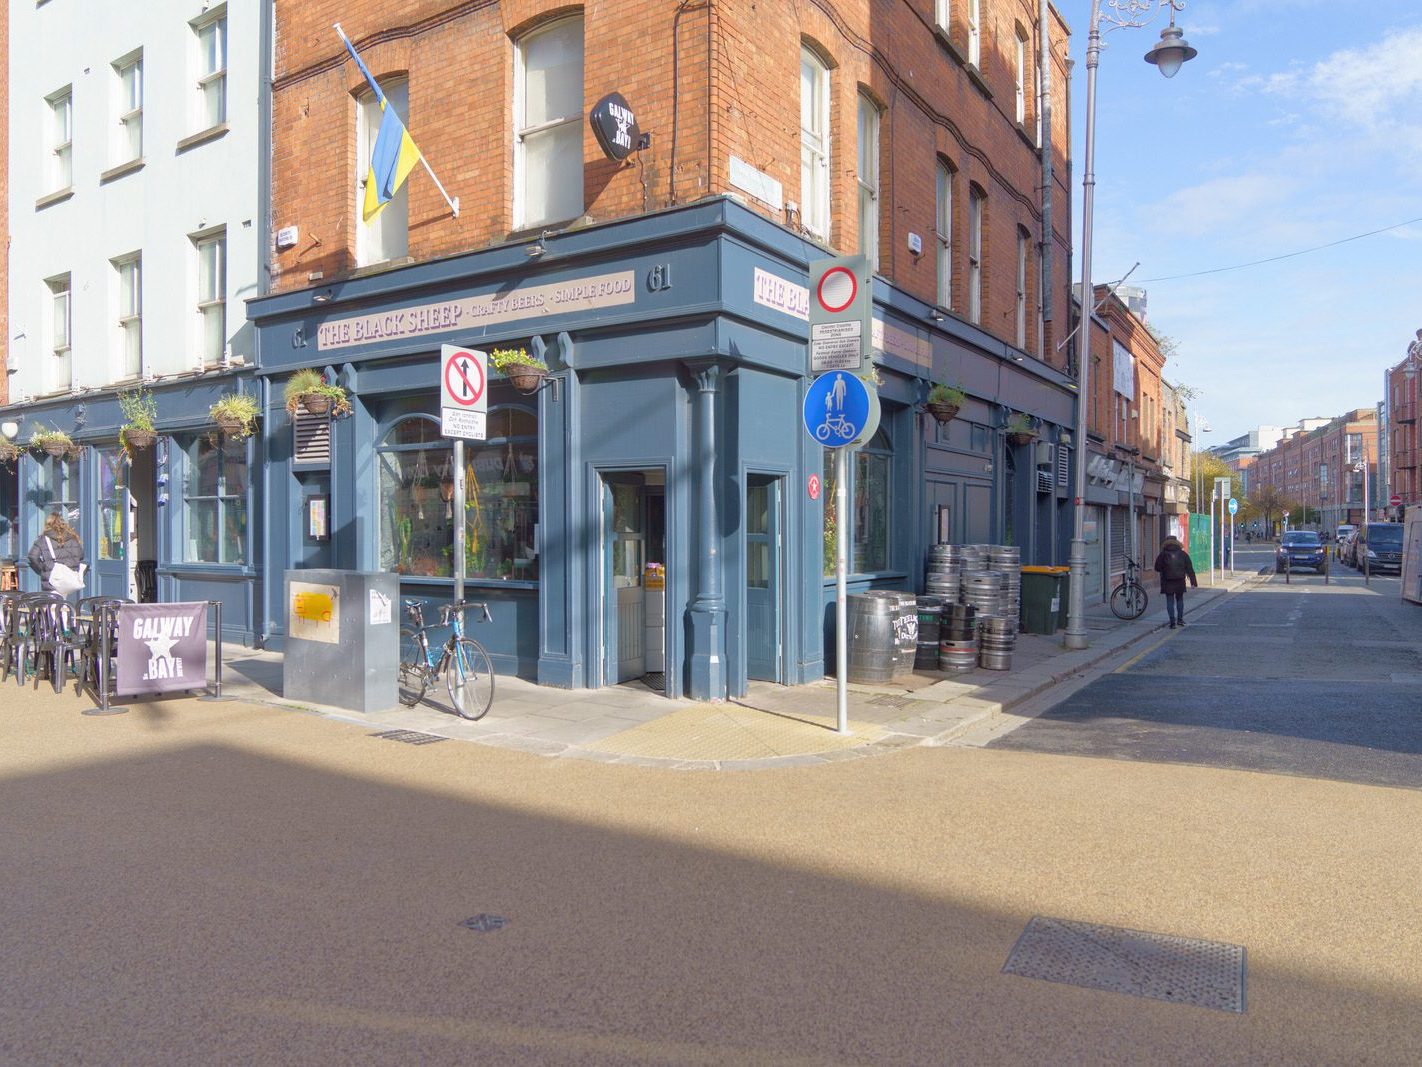 CAPEL STREET IS STILL A W.I.P. [THE PERIOD BETWEEN HALLOWEEN AND CHRISTMAS]-224789-1